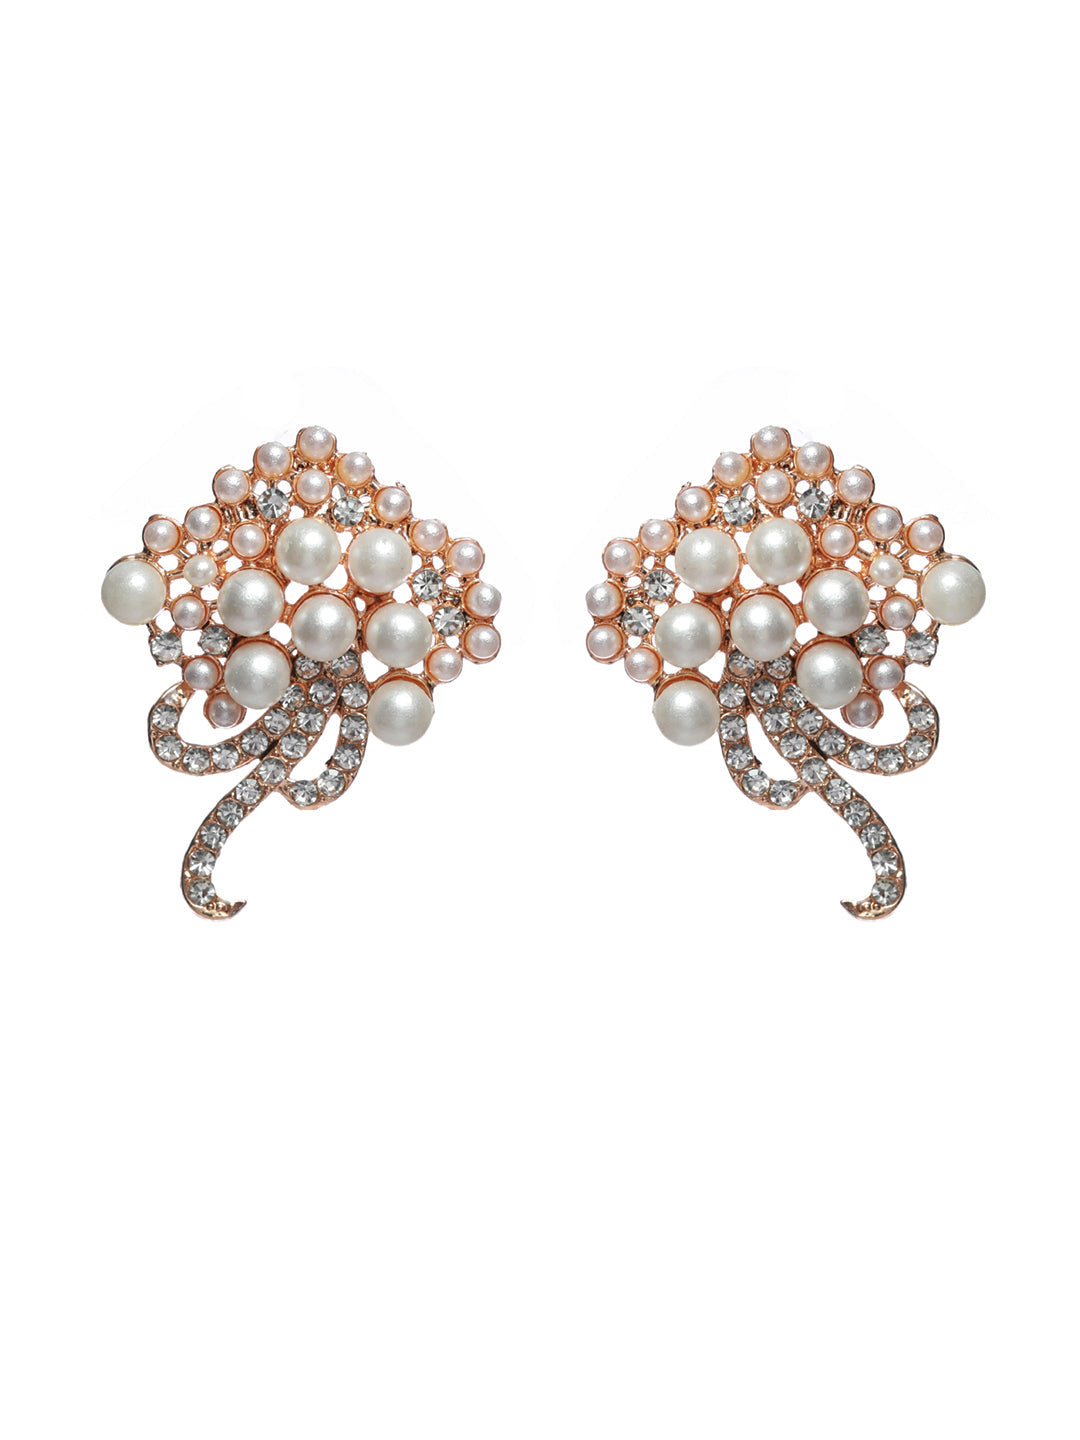 Floral Pearl Studded Silver Rose Gold Plated Earring Set - NOZ2TOZ